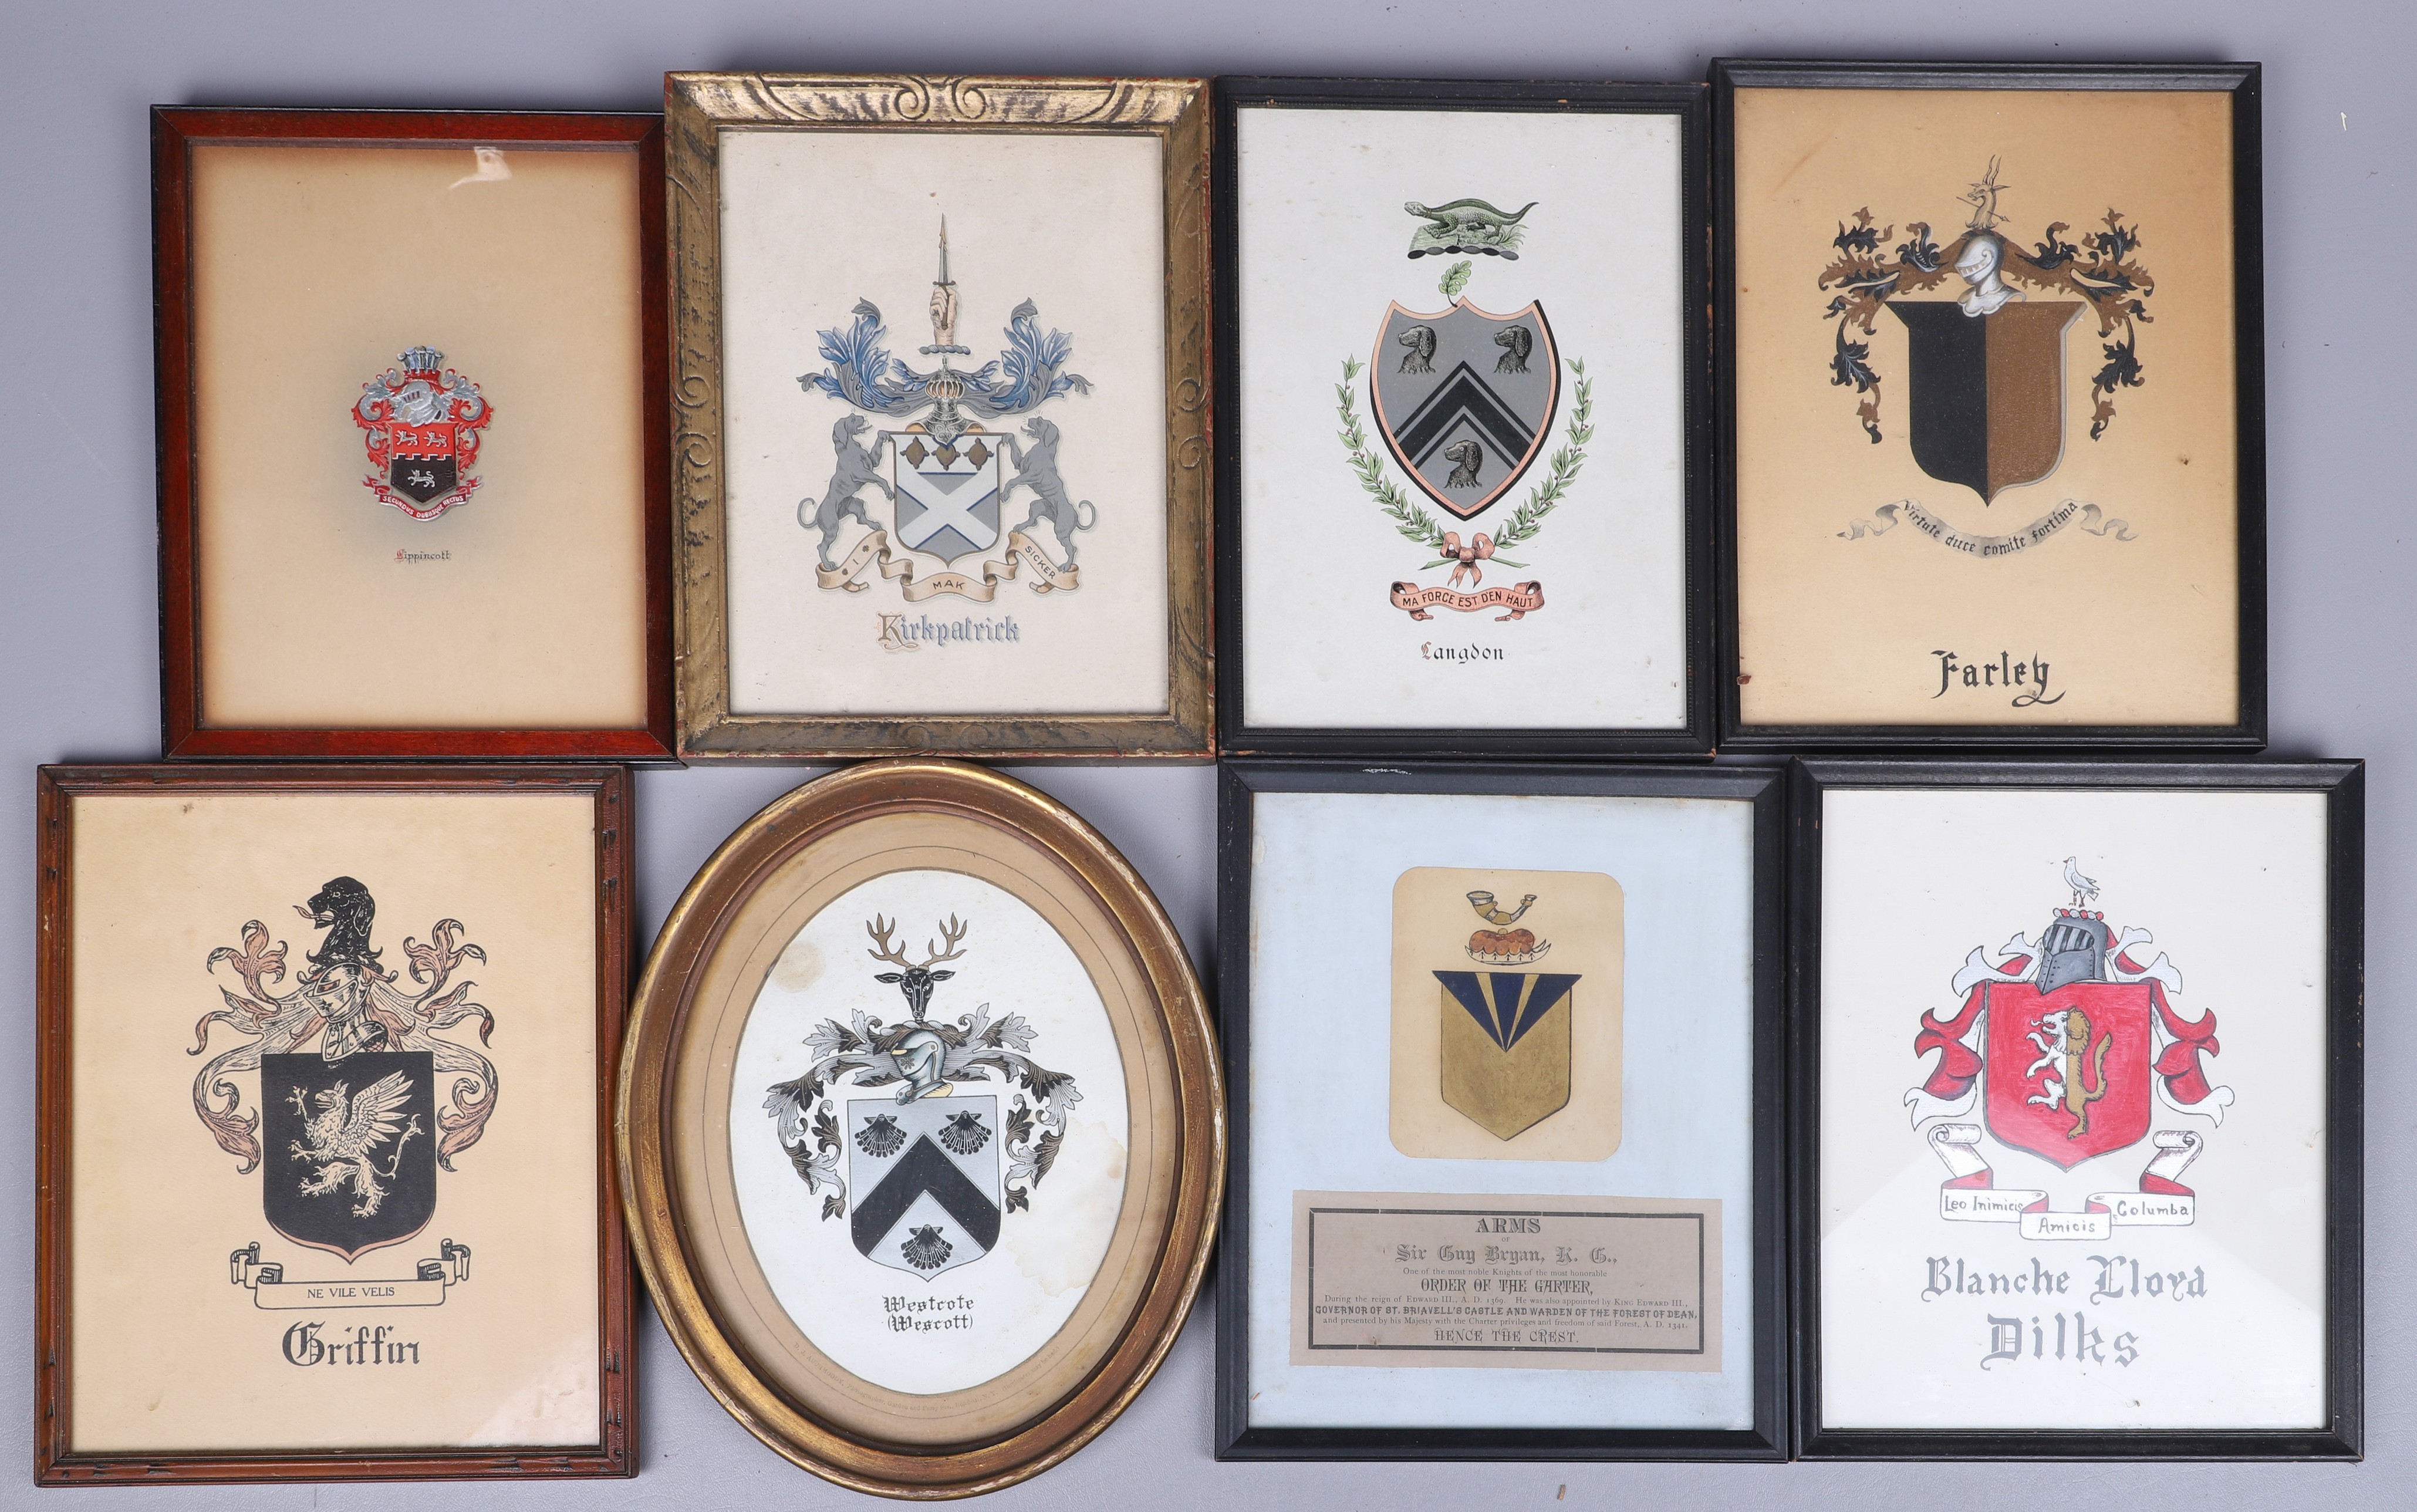  8 Framed coat of arms plaques  27a774